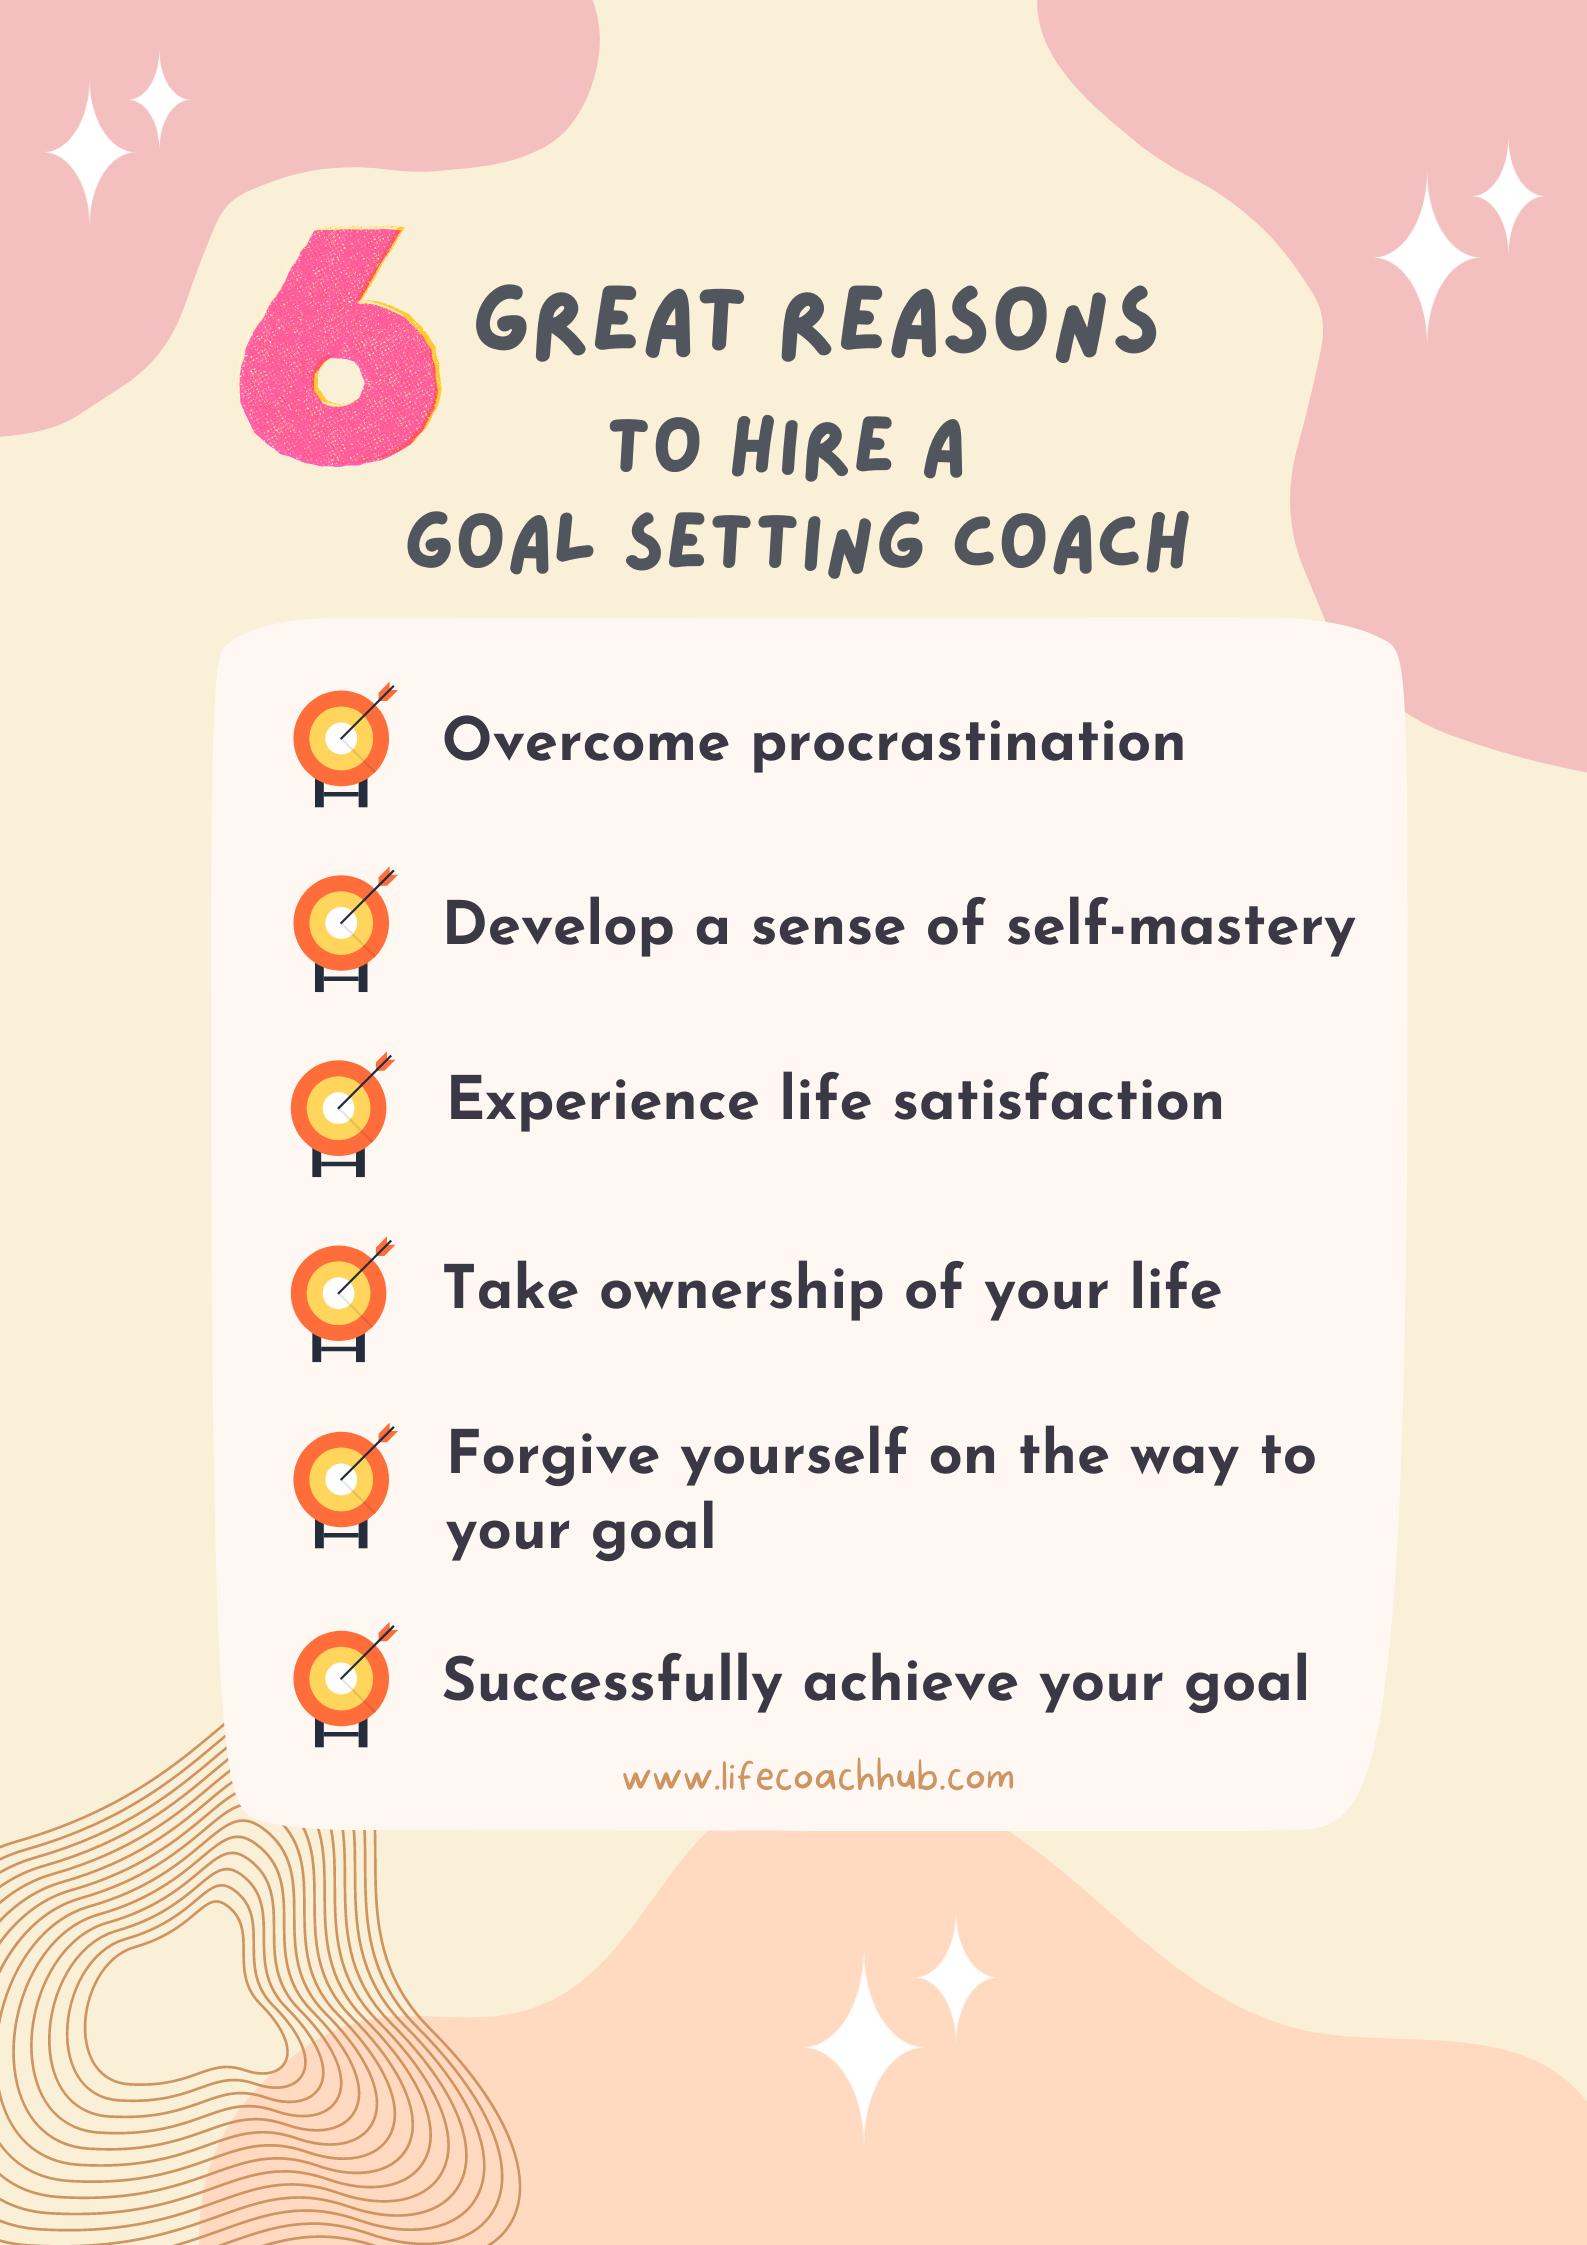 6 Great Reasons to hire a goal setting coach